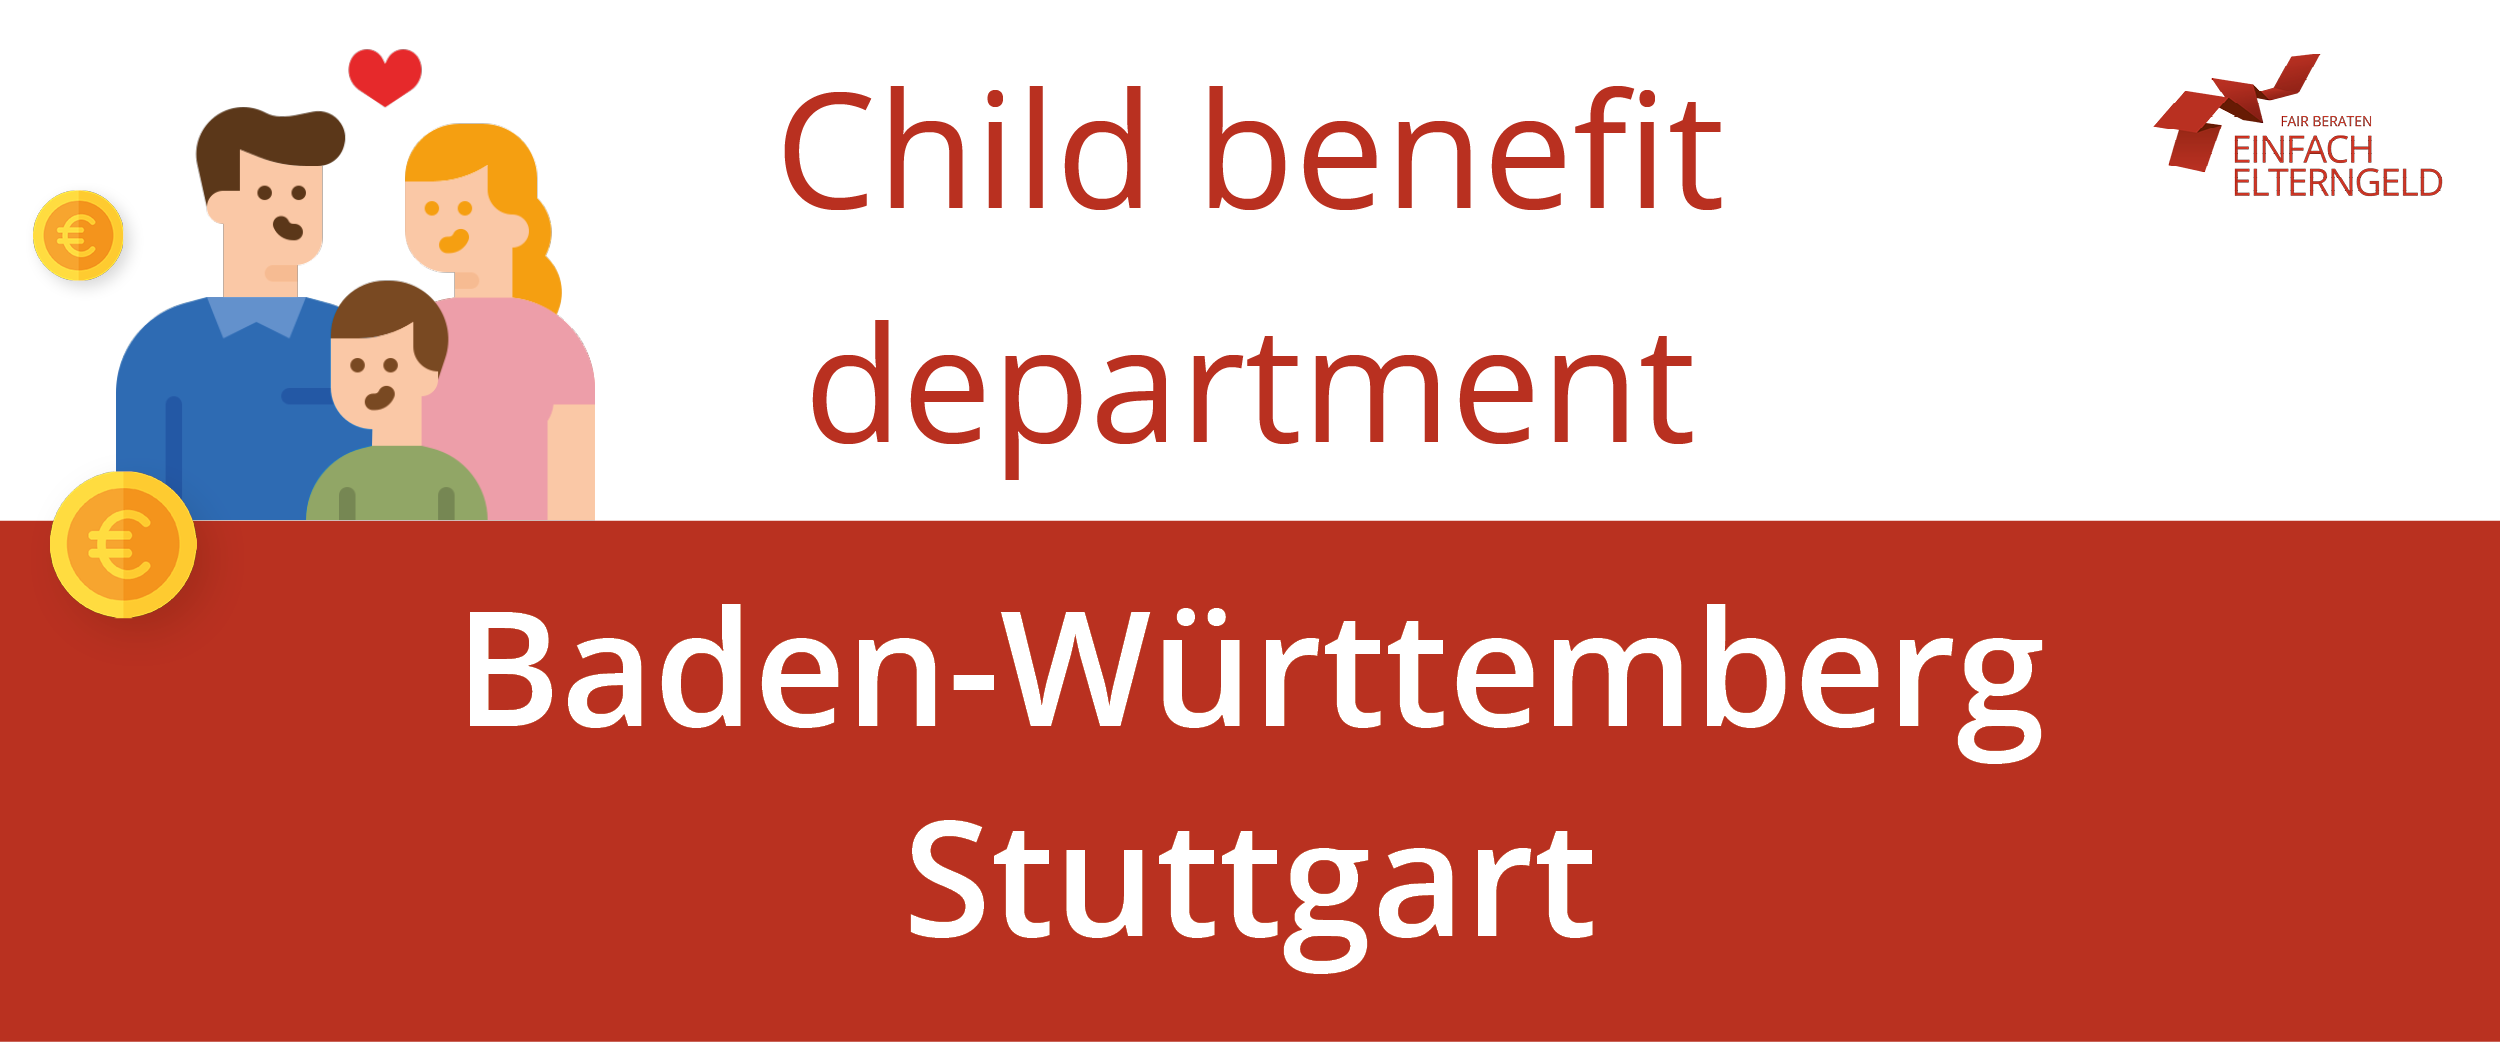 We introduce to you the Child benefit department Baden-Württemberg Stuttgart.